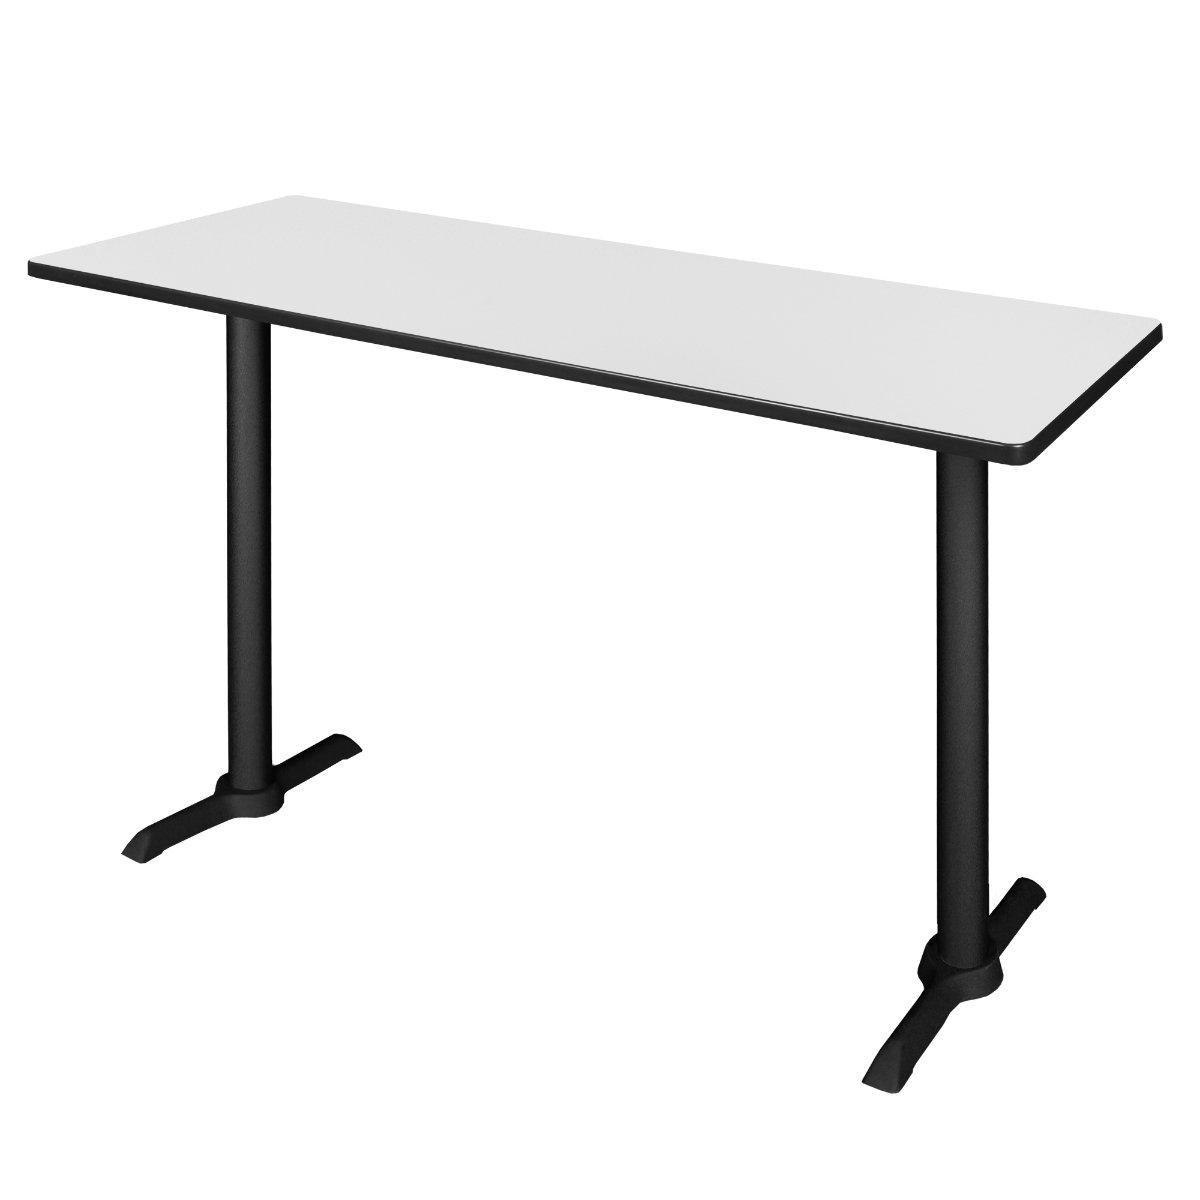 Cain 60" x 24" Cafe Height Training Table